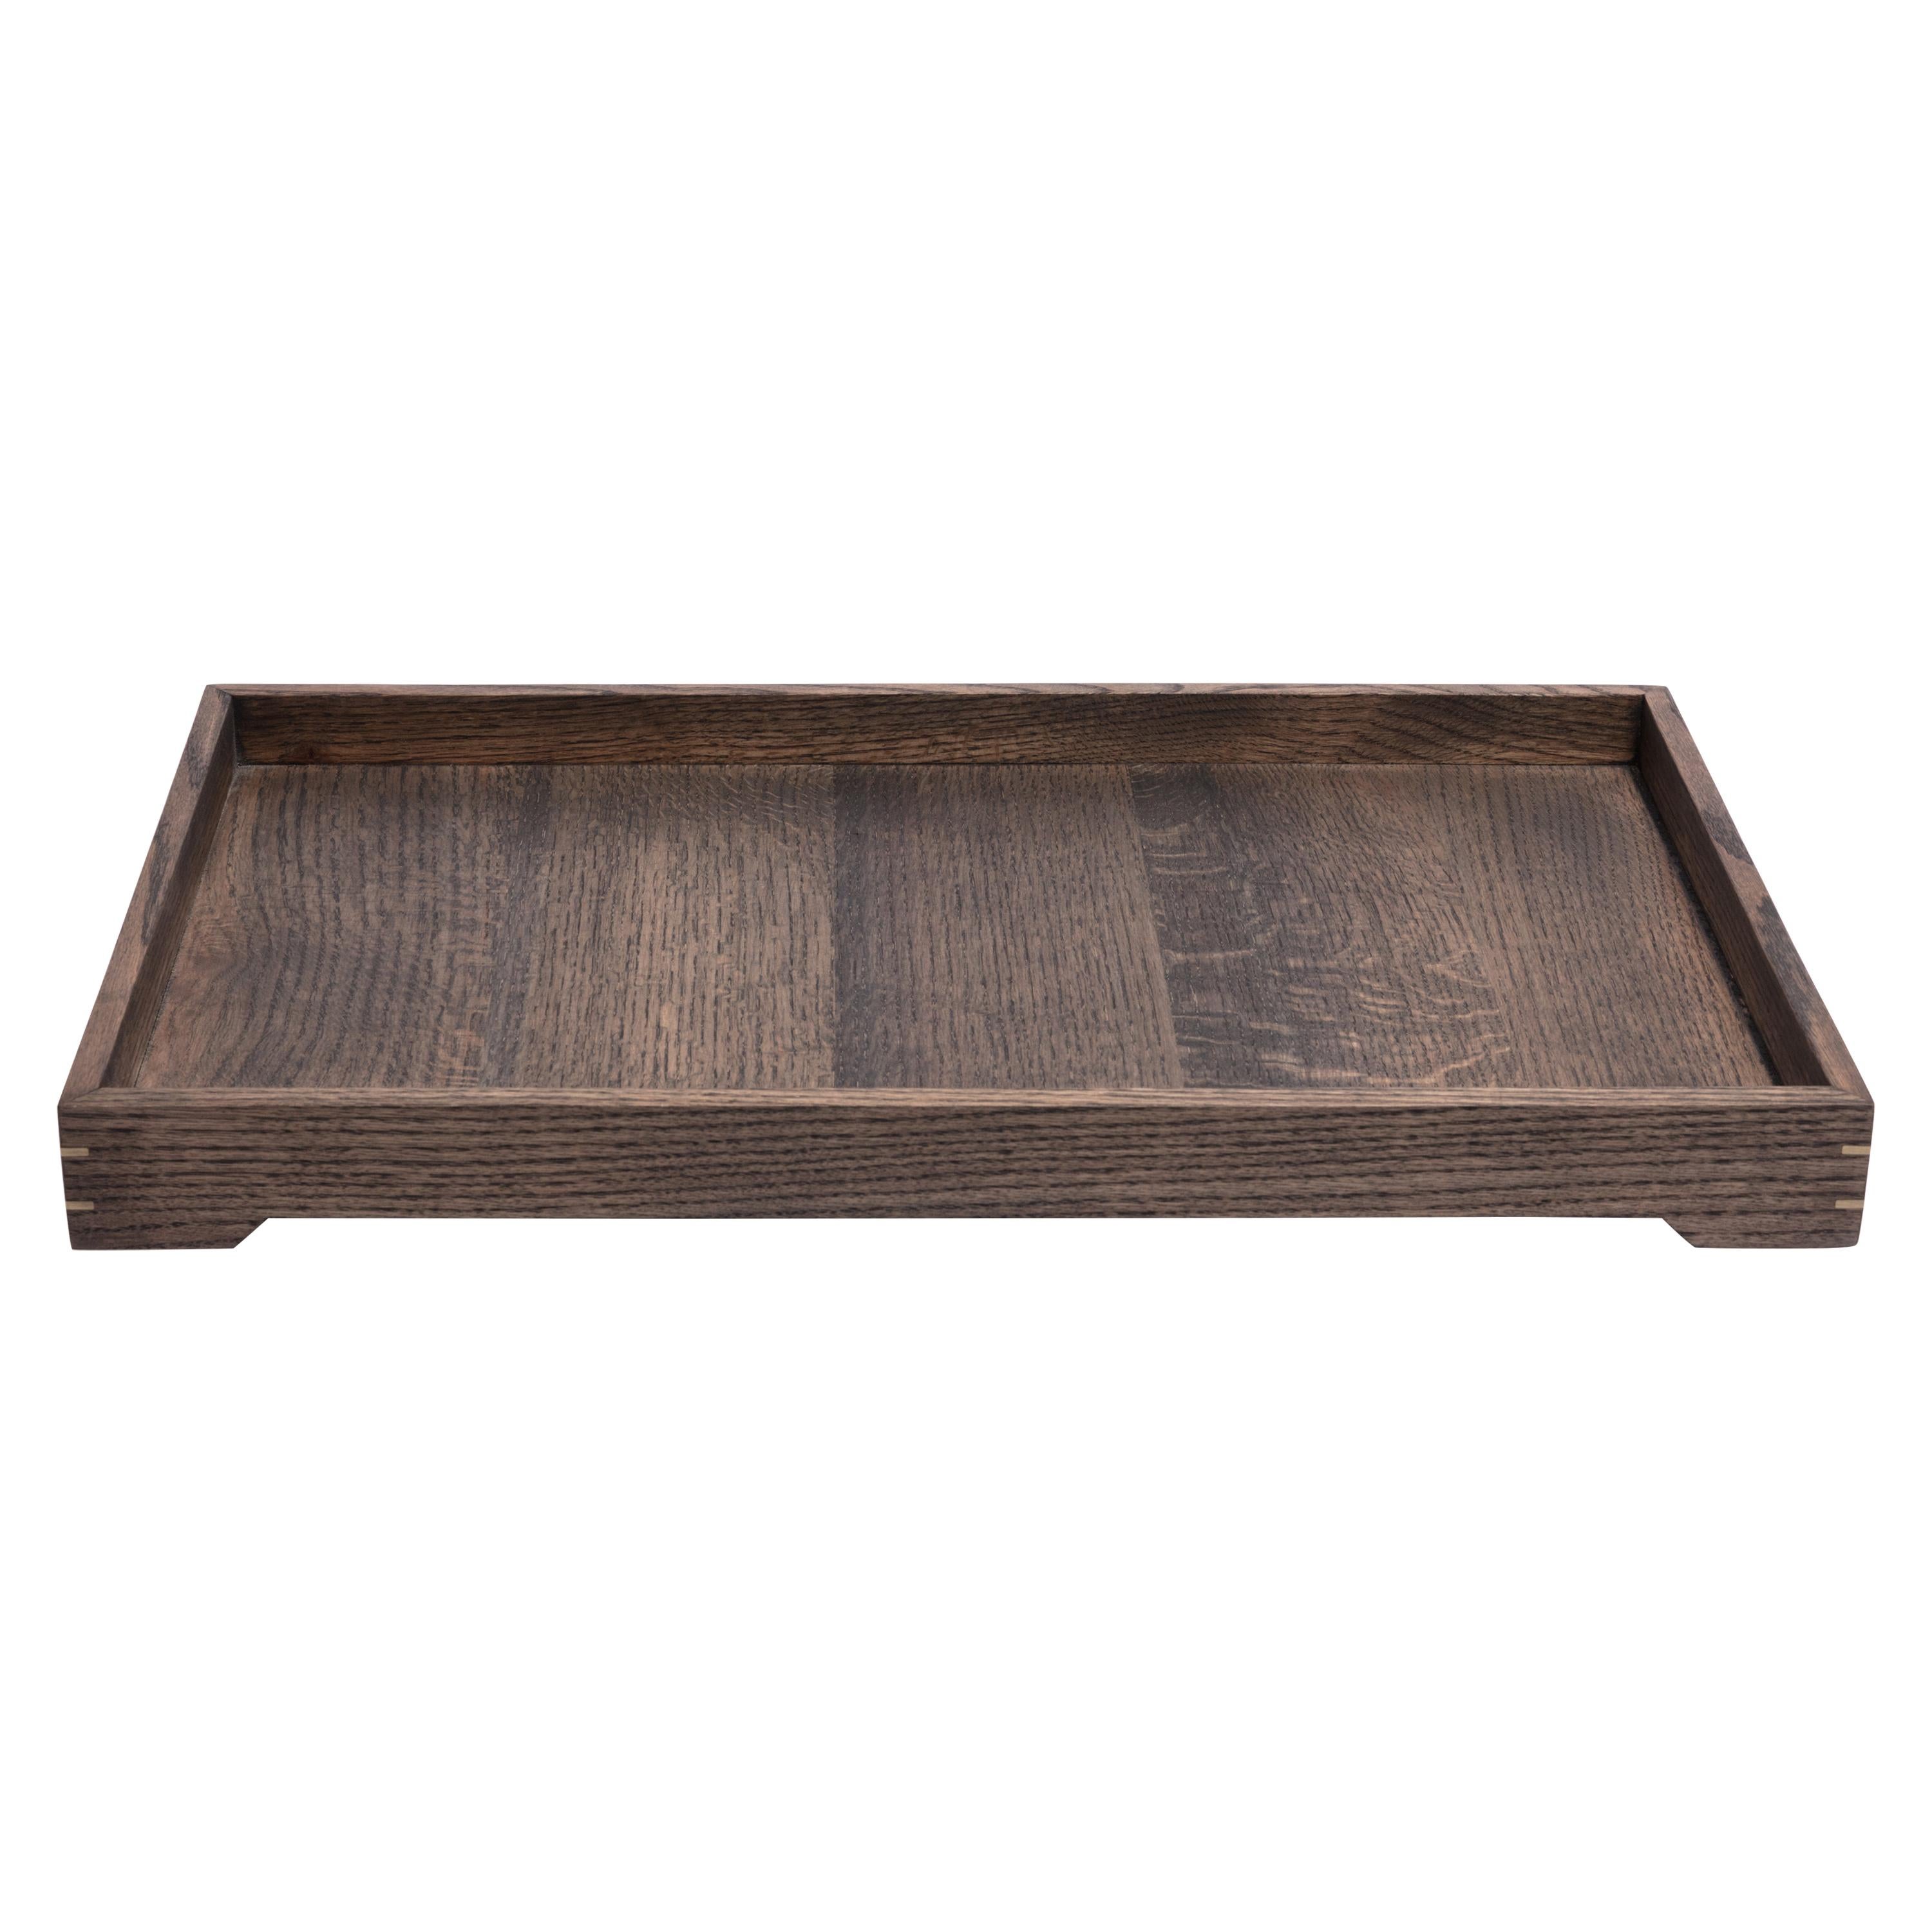 Solid Ebonized Oak Wood and Brass Tray for Barware or Ottoman Display or Jewelry